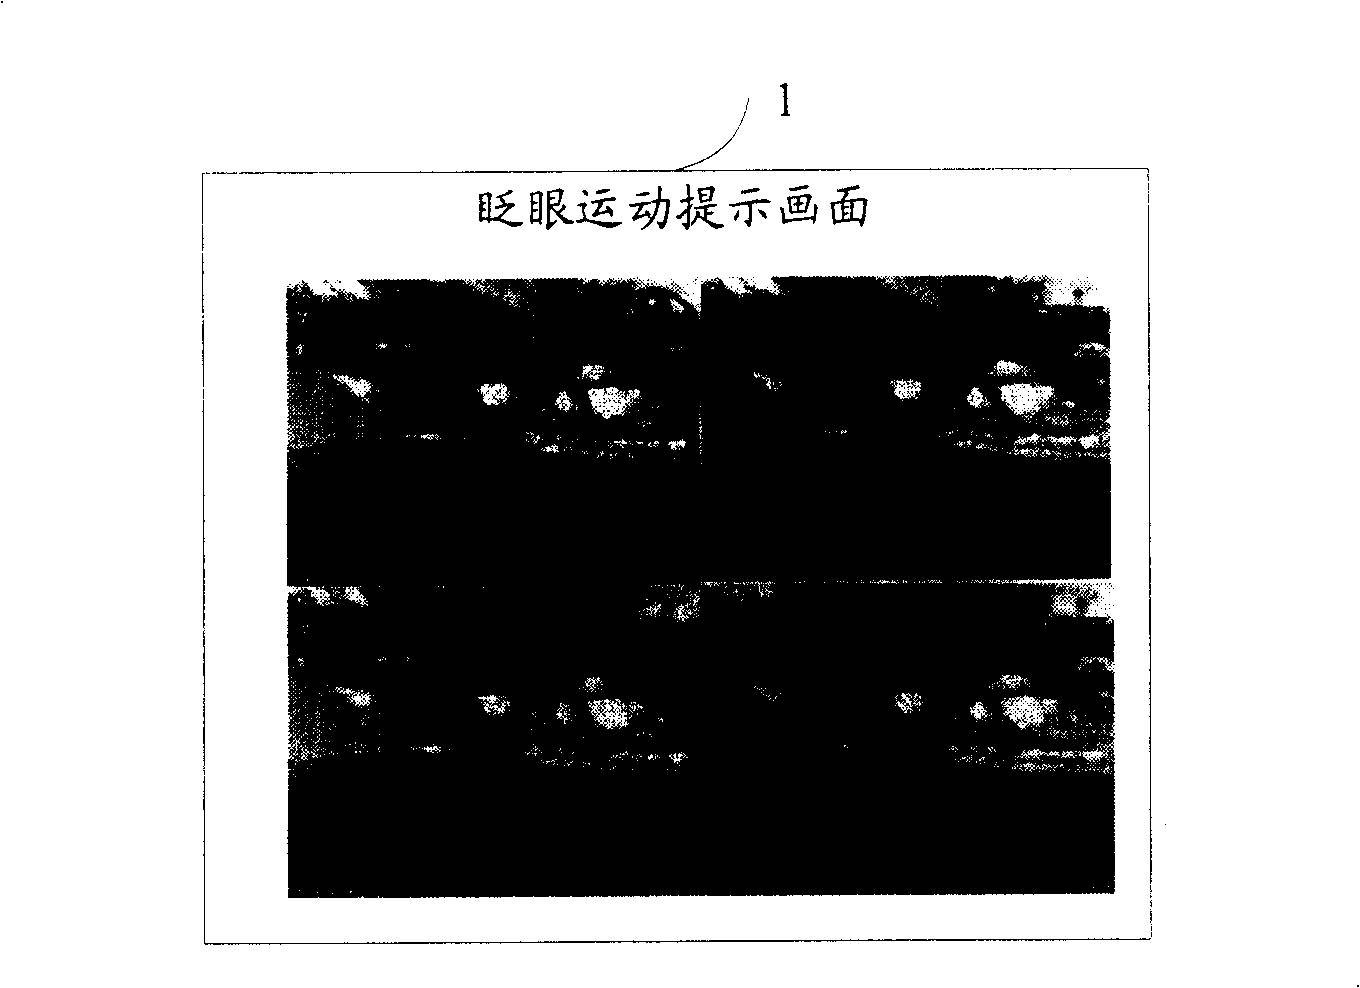 Apparatus and method for alleviating local fatigue in eyes and body of display equipment user